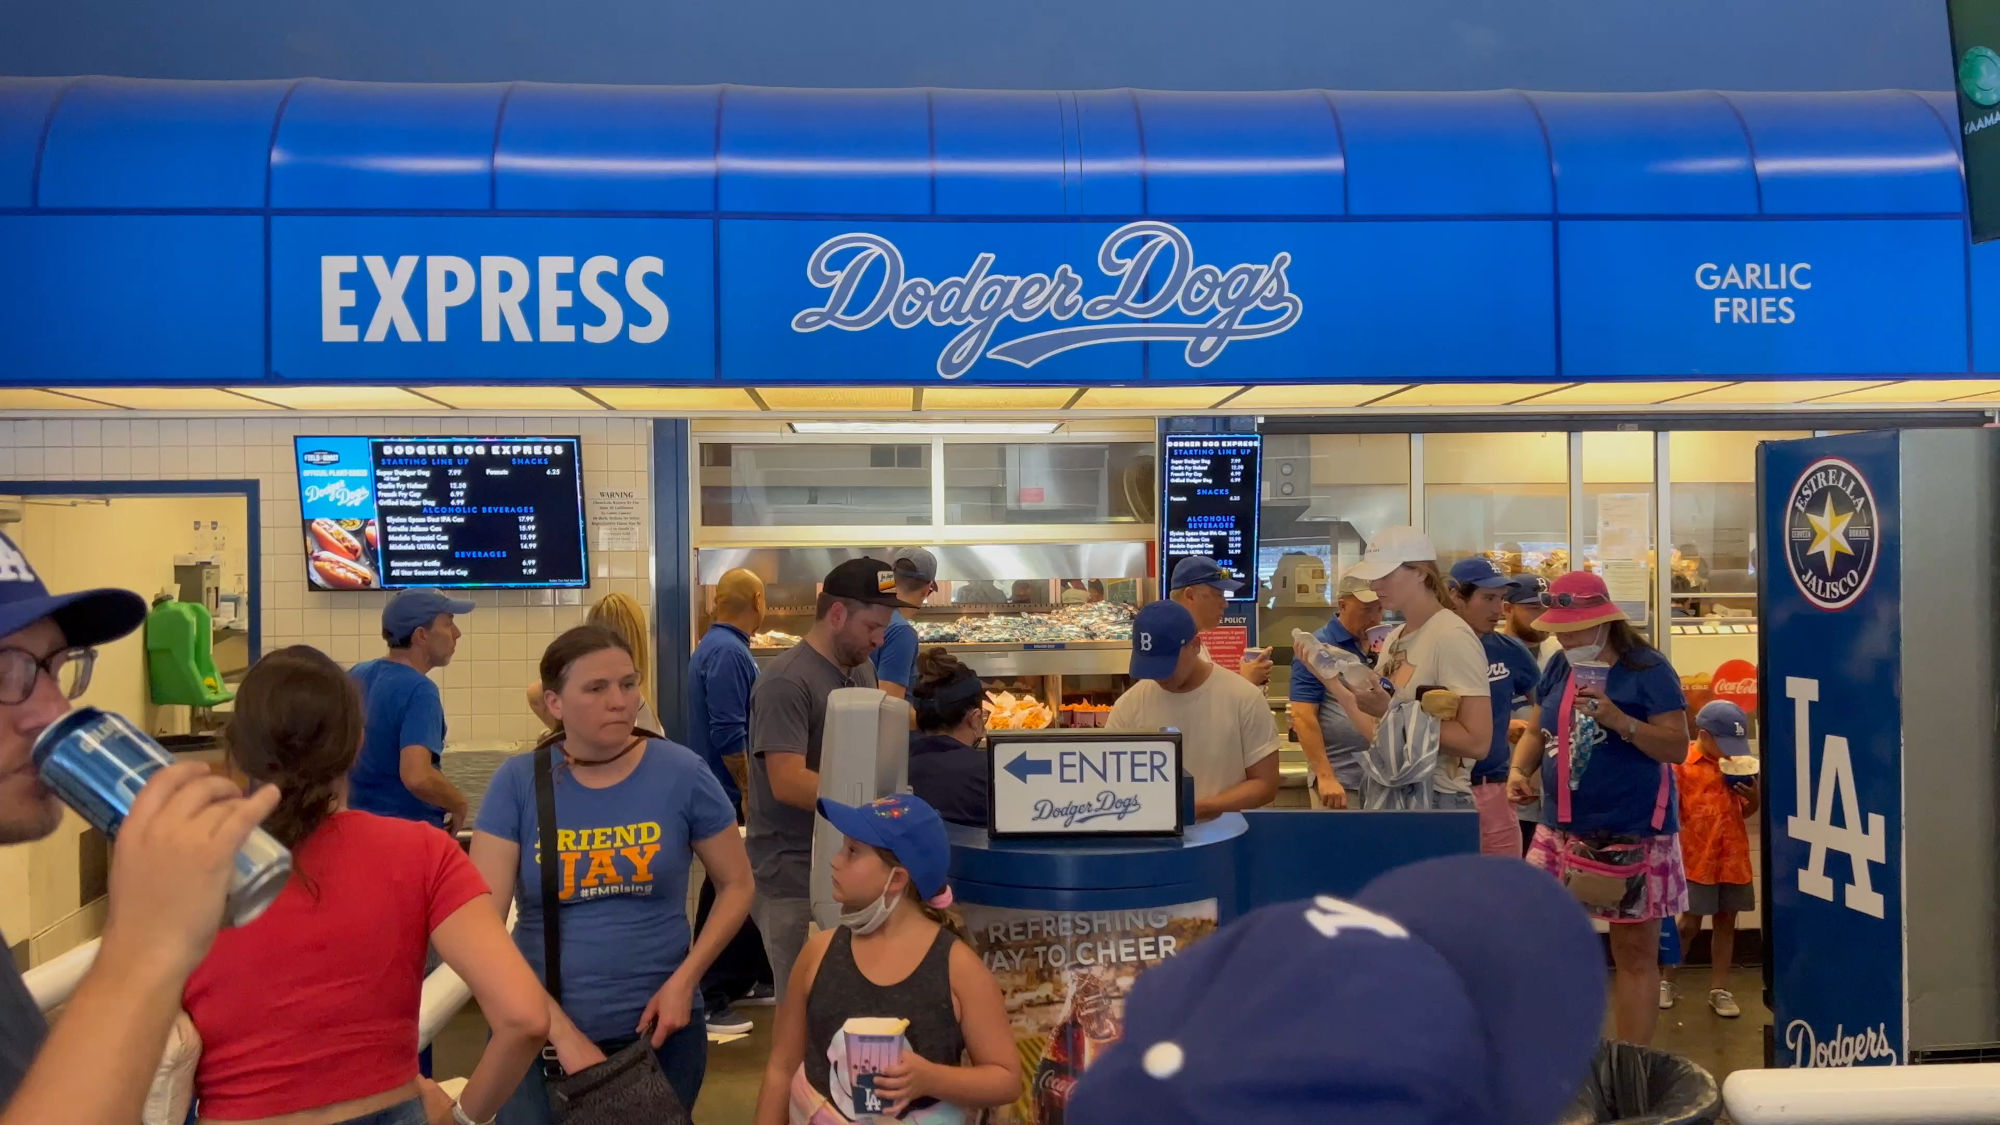 Dodger Dogs Express Section 6